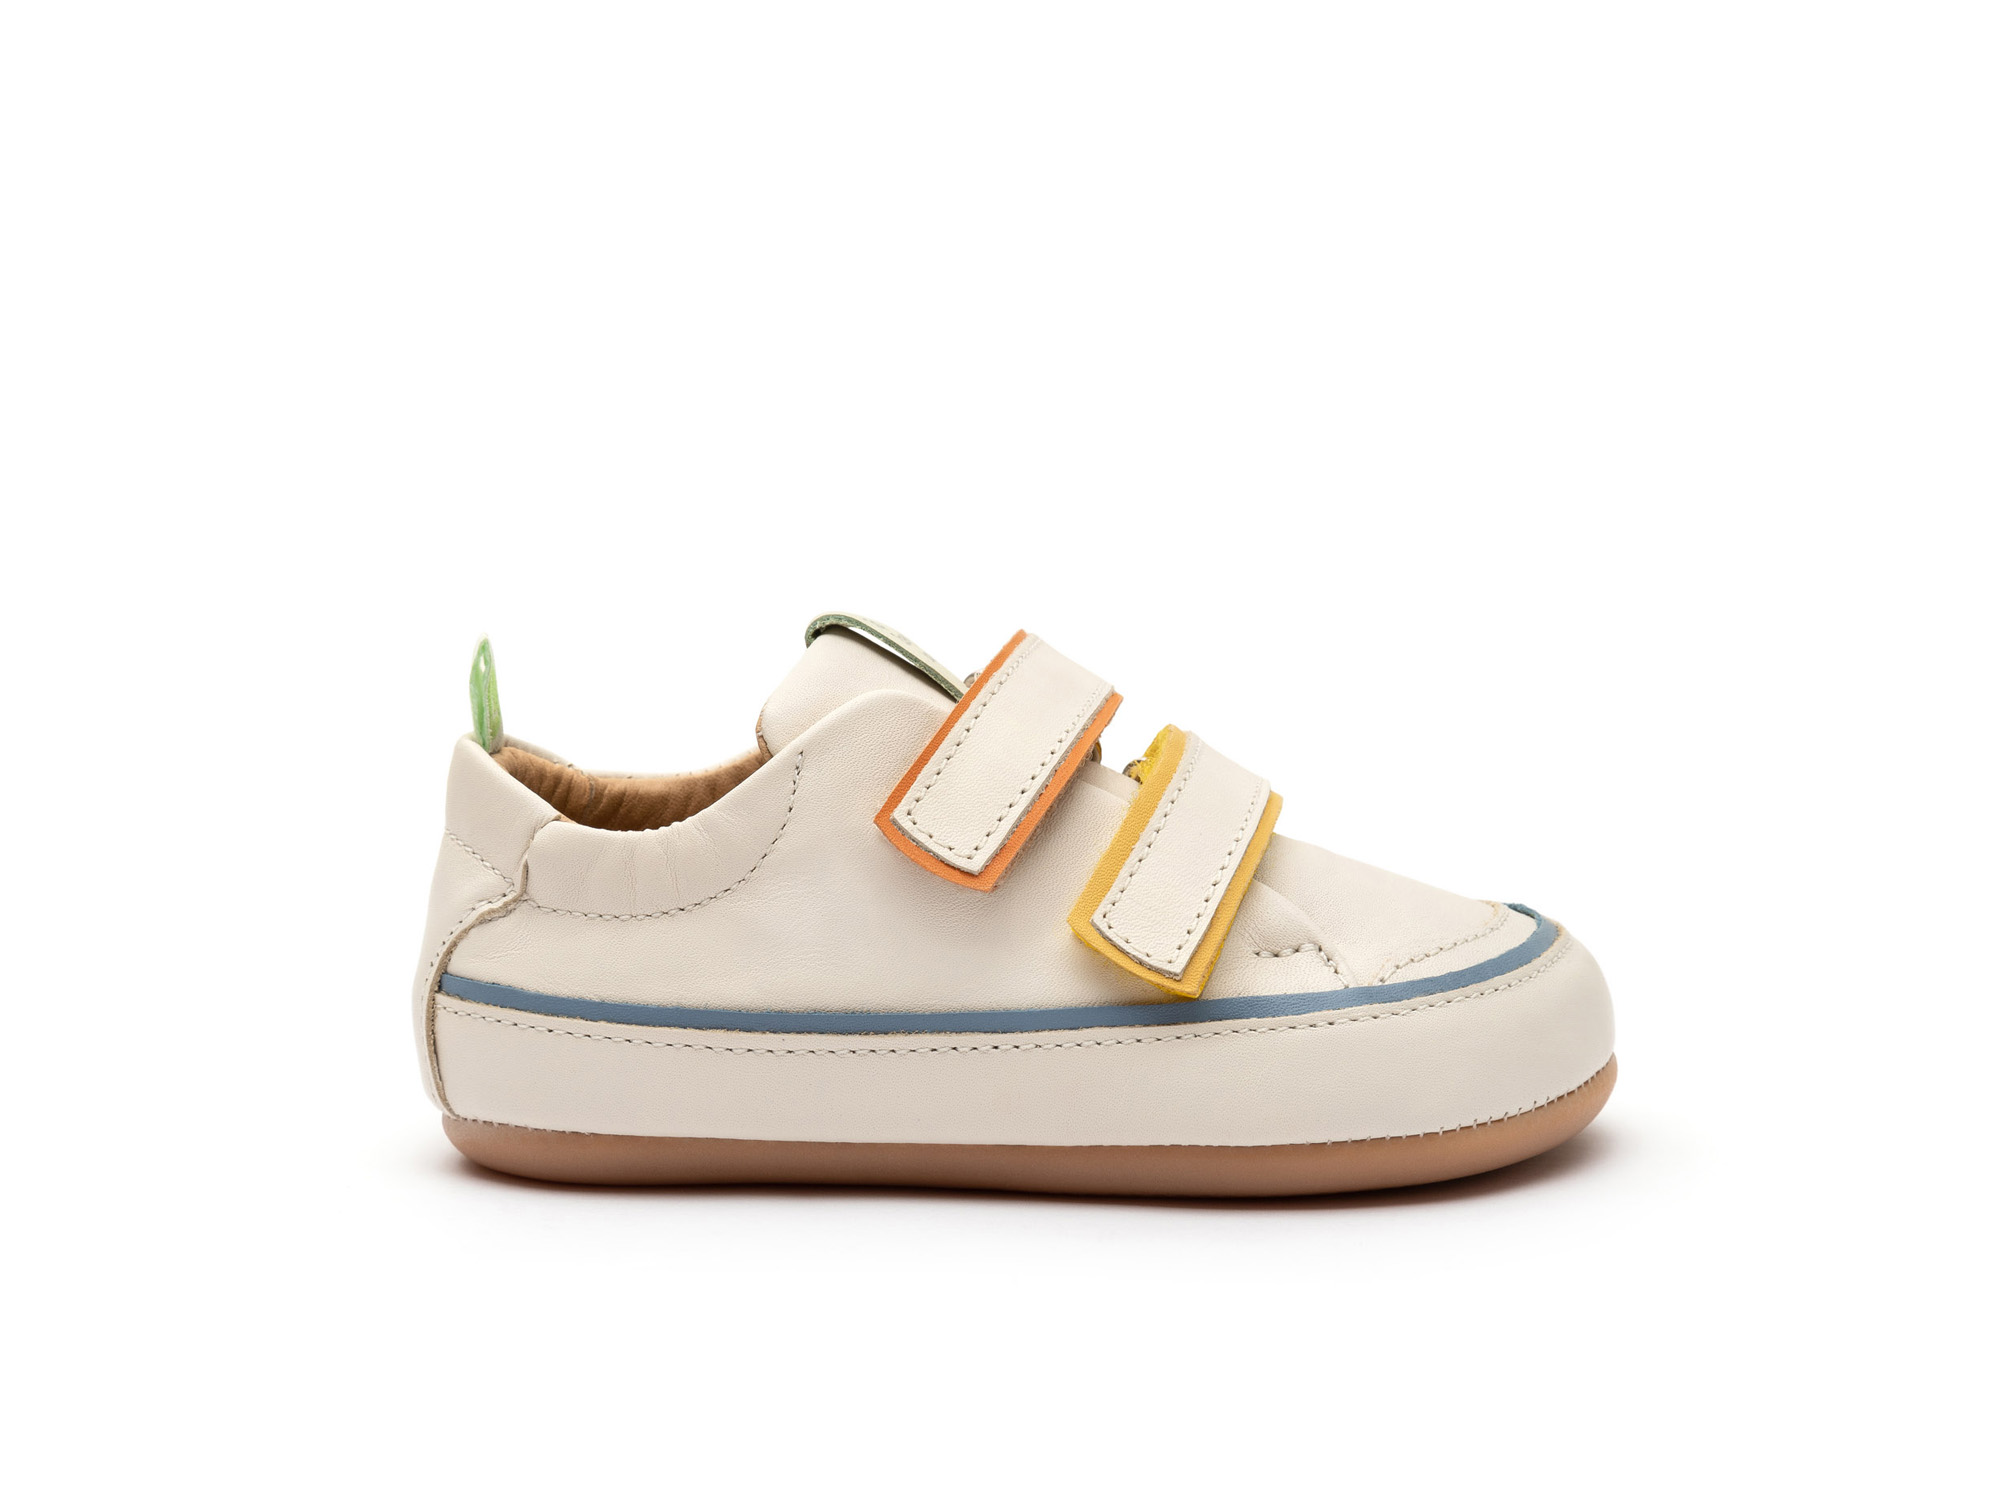 UP & GO Sneakers for Unissex Bossy Colors | Tip Toey Joey - Australia - 4